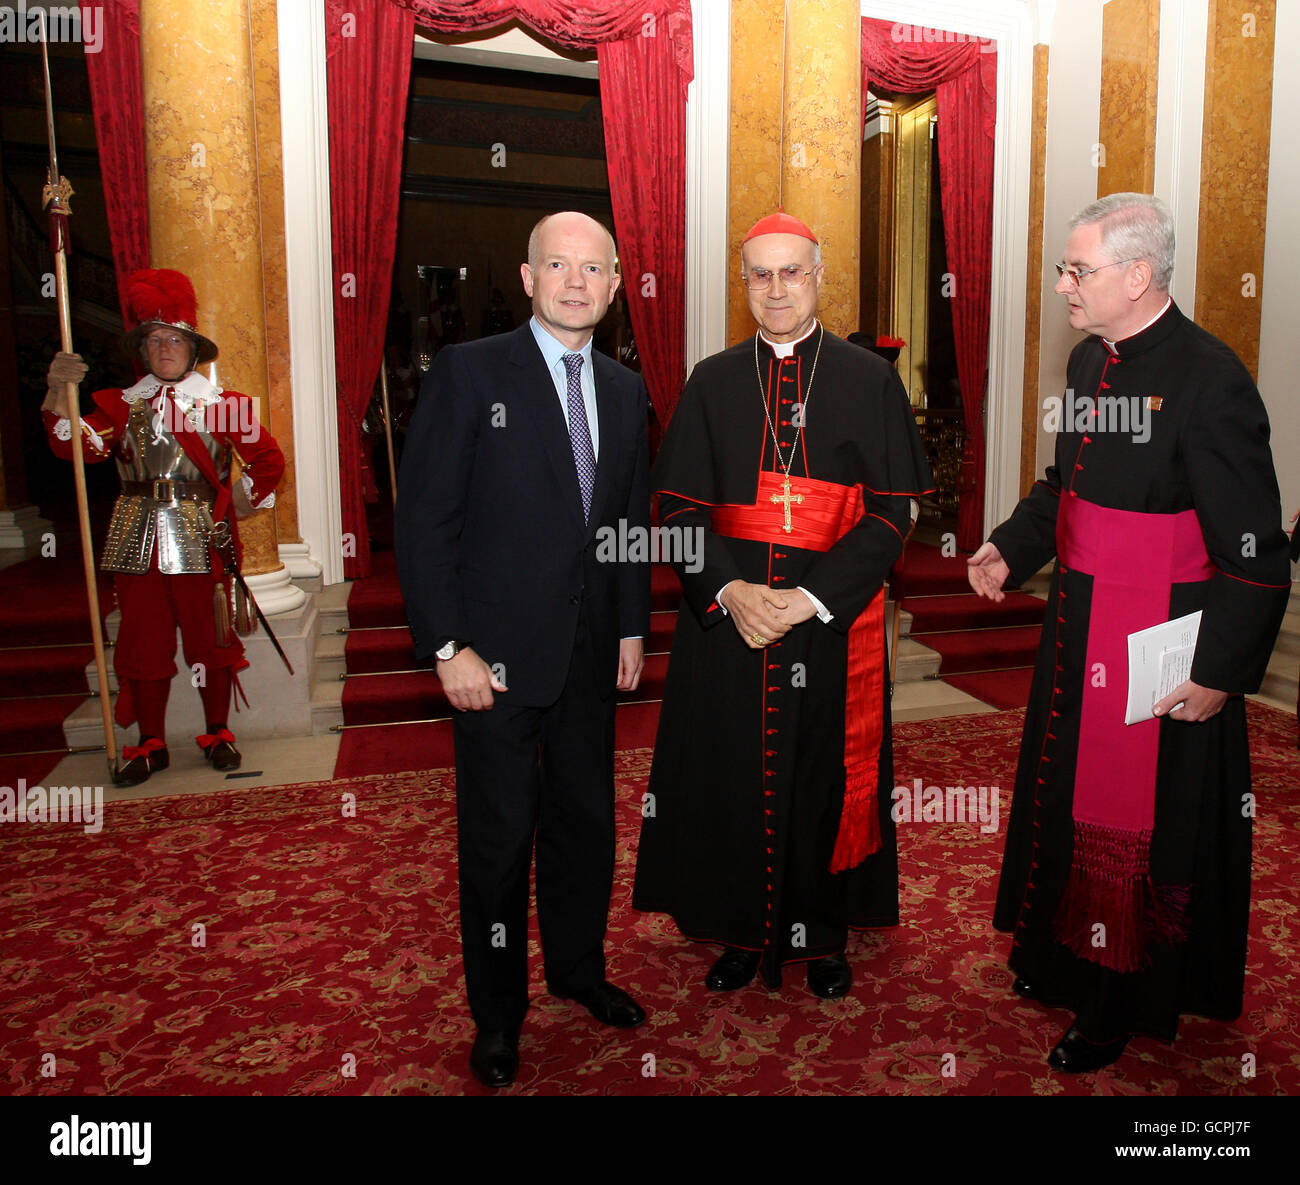 Foreign Secretary William Hague receives Cardinal Tarcisio Bertone, S.D.B., Secretary of State, Camerlengo of the Holy Roman Church, Archbishop emeritus of Genoa at a State Banquet in honour of Pope Benedict XV1 at Lancaster House in central London on the second day of his State Visit. Stock Photo